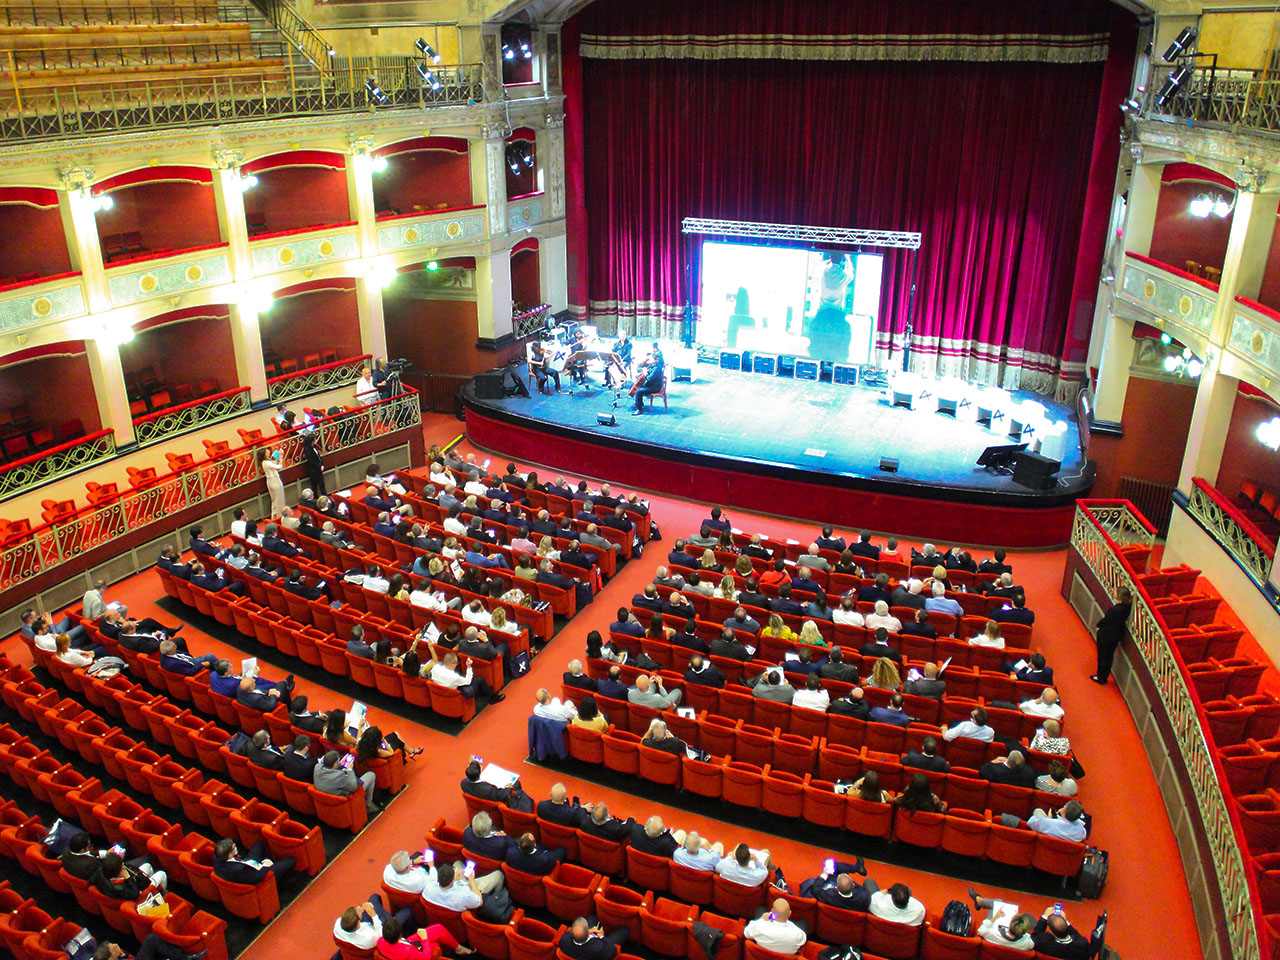 Interiors of the Politeama theater in Palermo